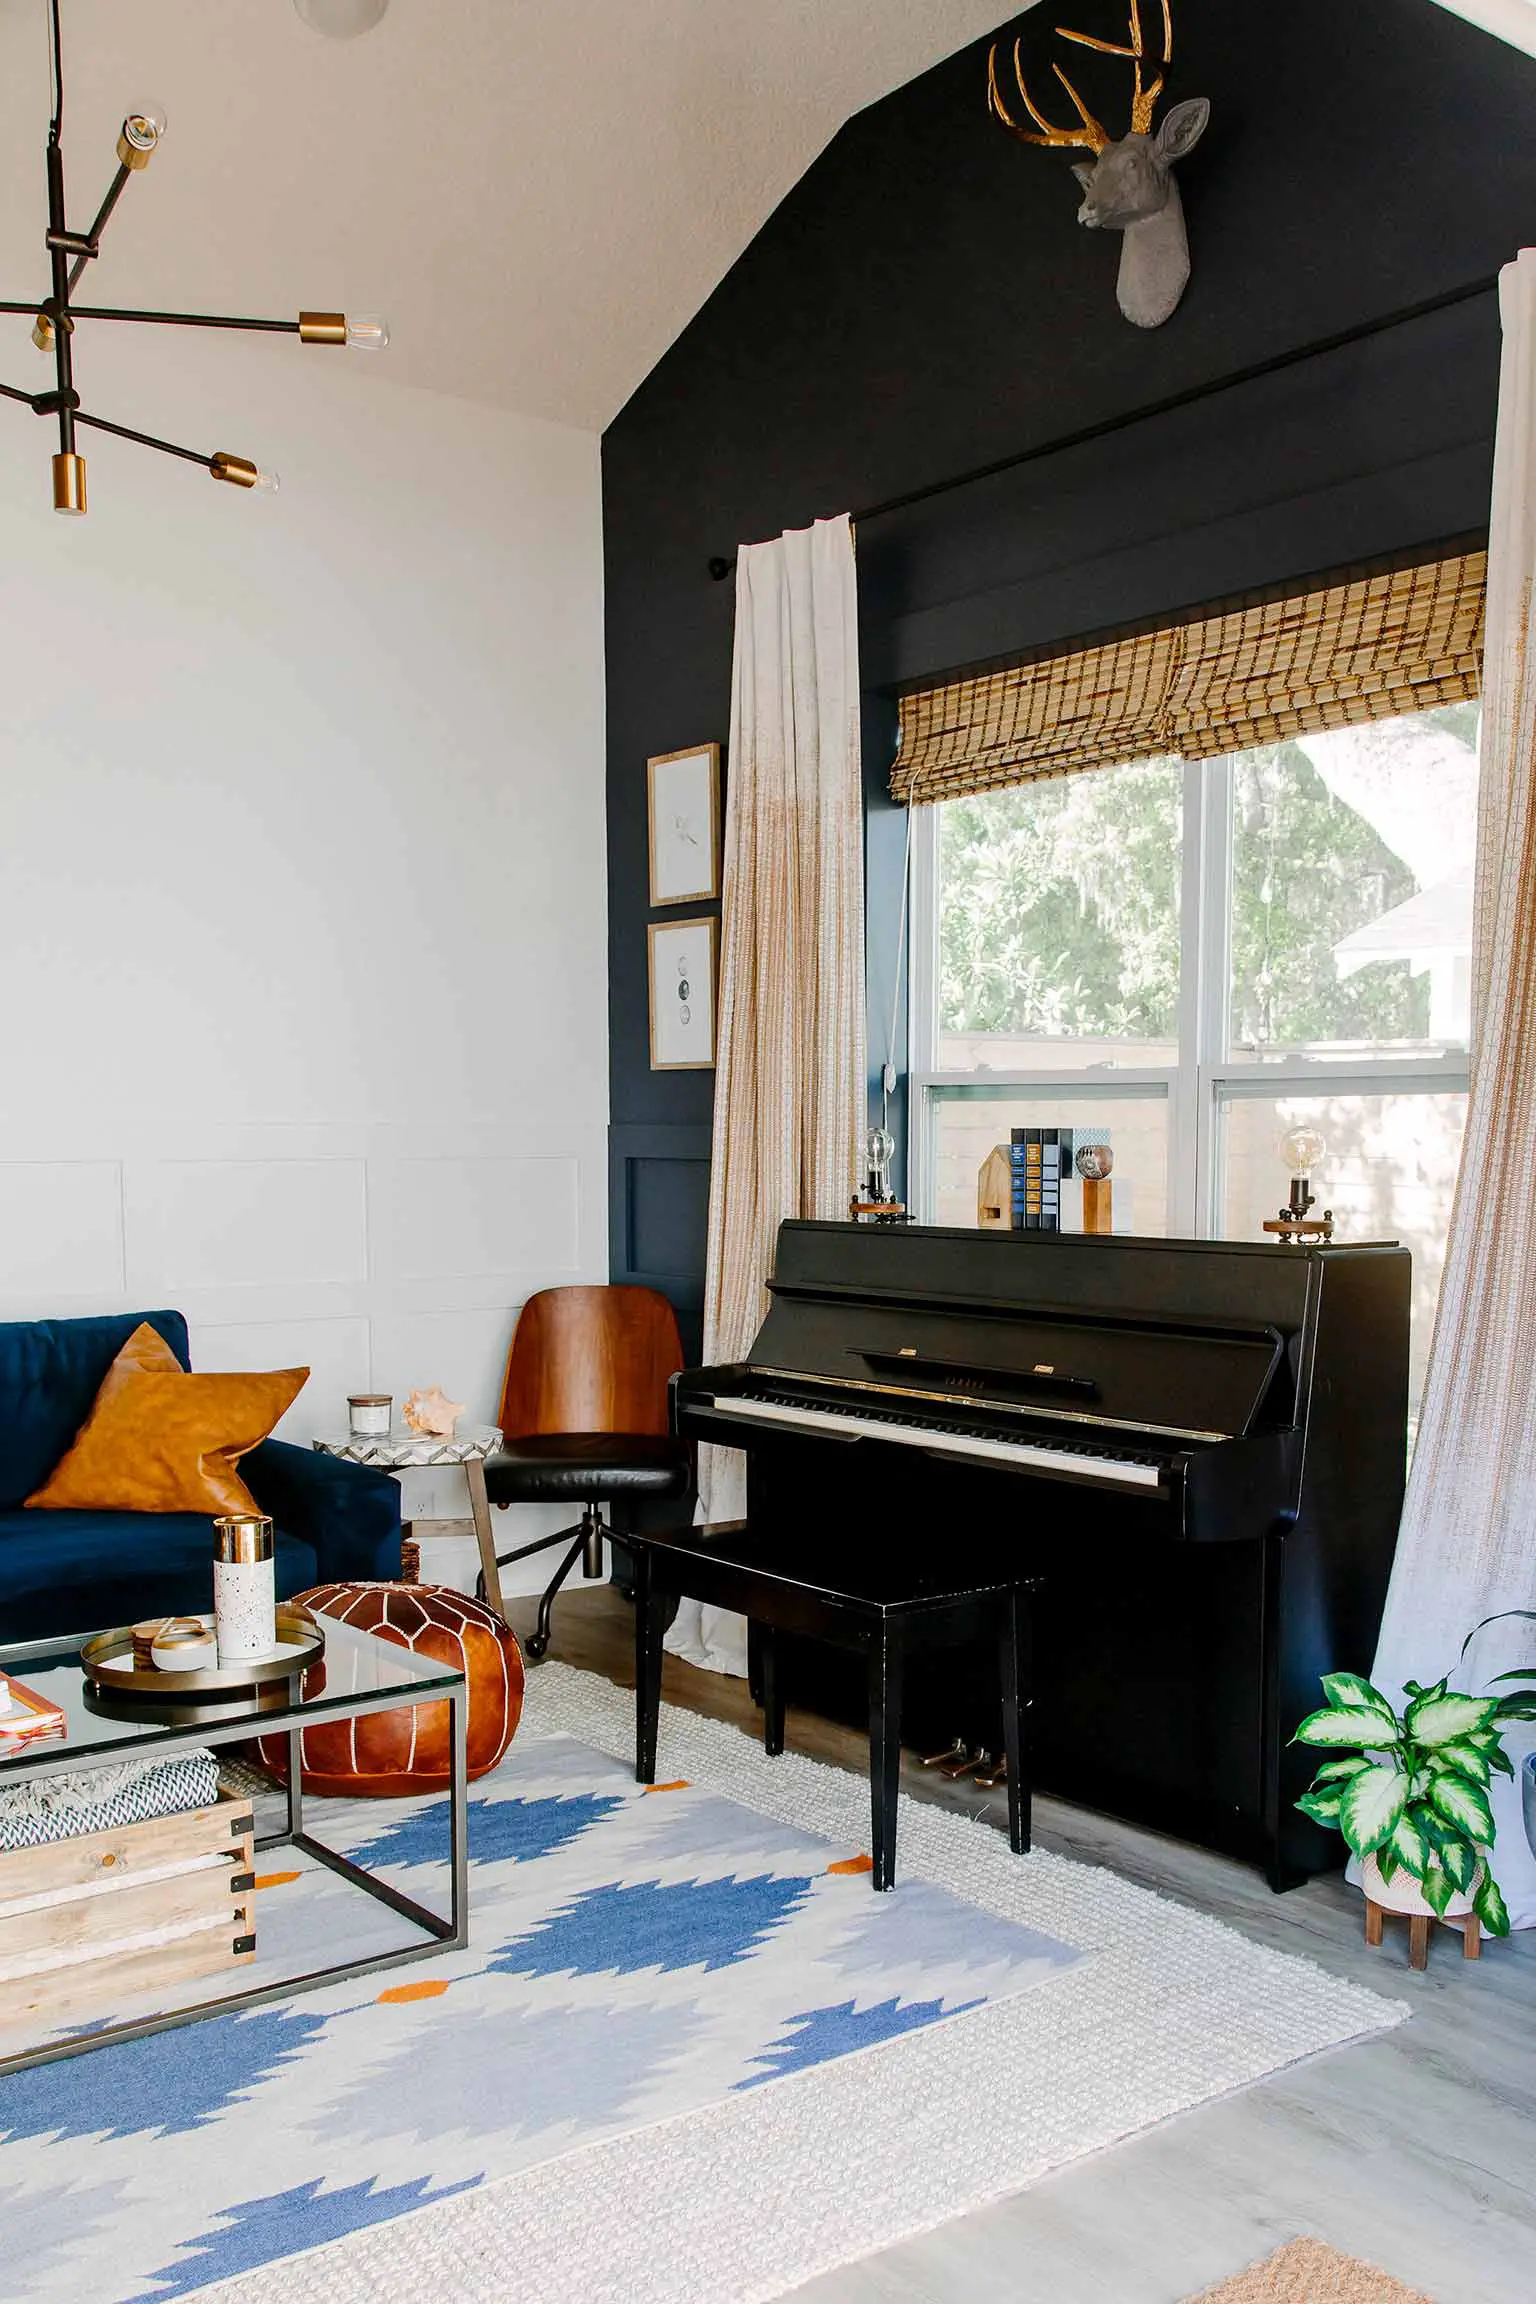 Mid-century modern guest house with a boho/eclectic twist - The Guest House Reveal - That Homebird Life Blog